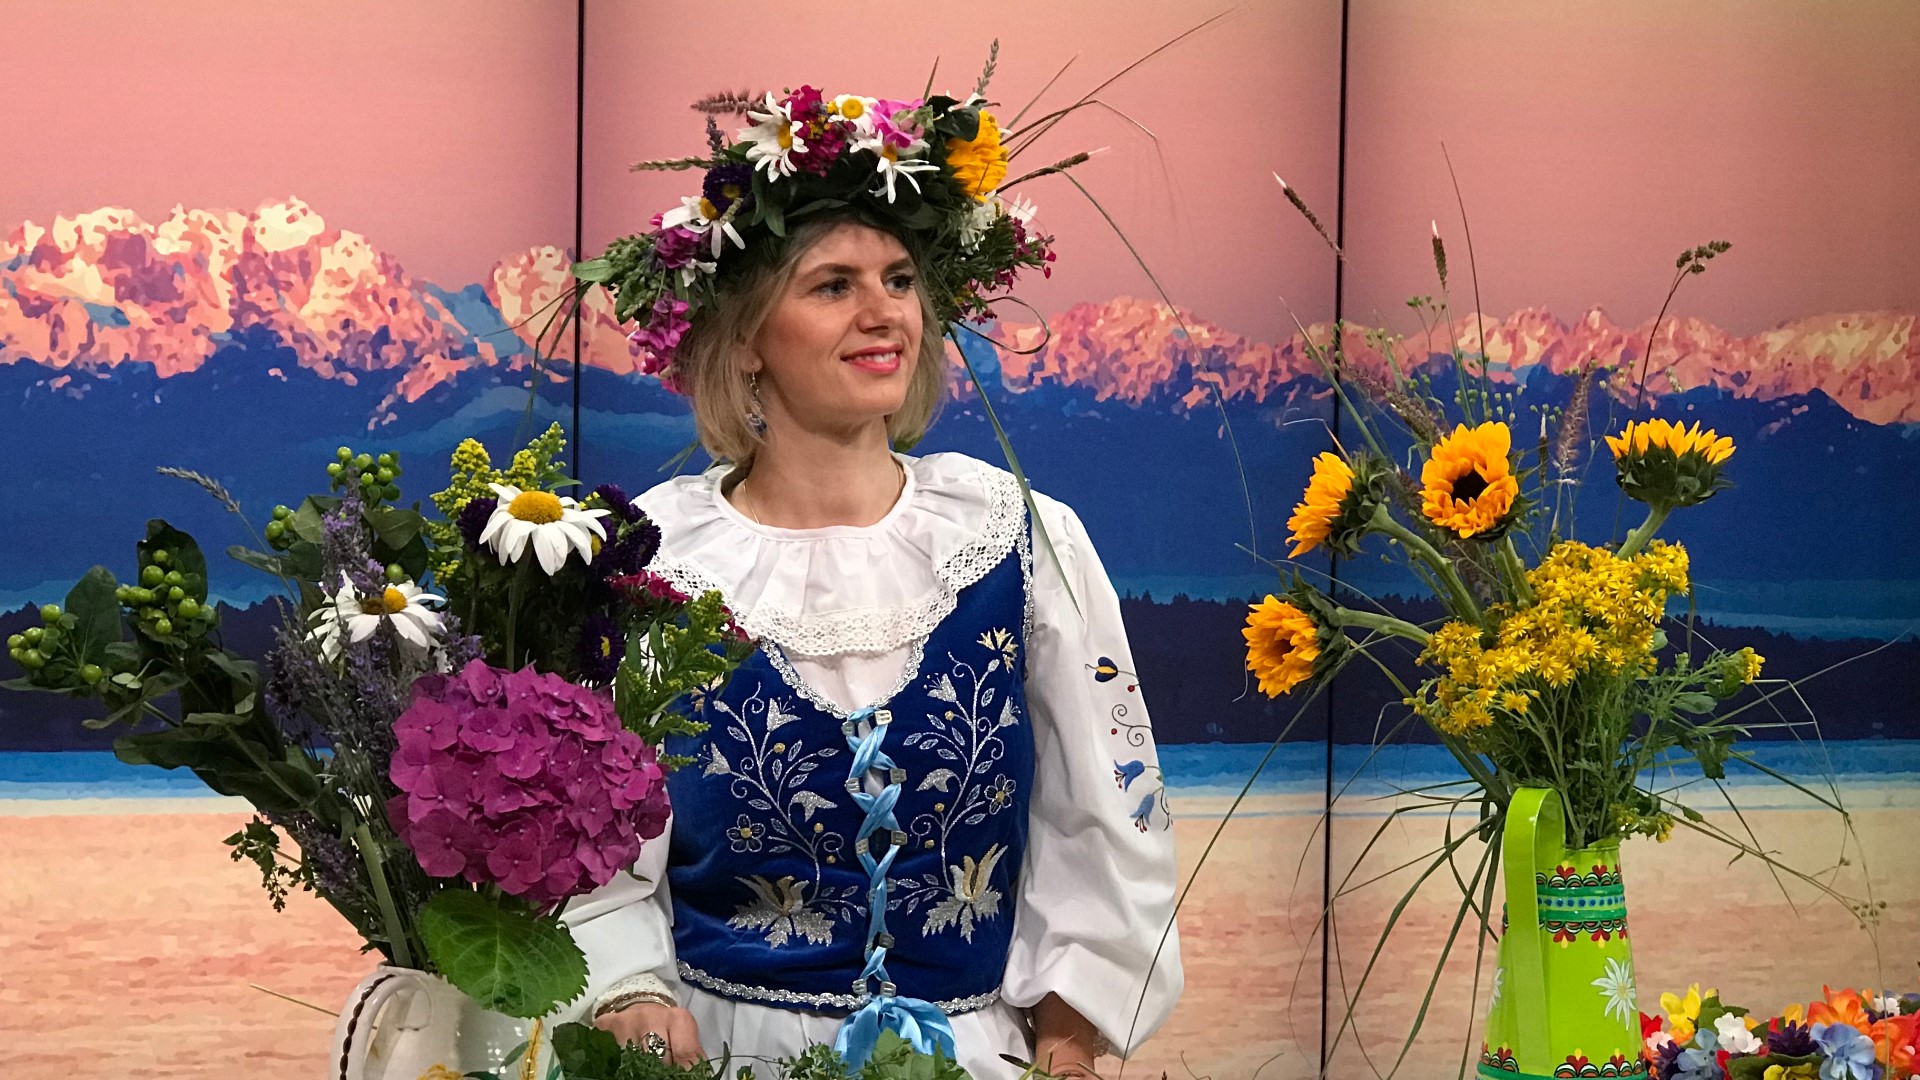 Pierogis, polka and accordion music... oh my! Flower crowns are just one of many traditions on display at the Seattle Polish Festival July 13th at the Seattle Center